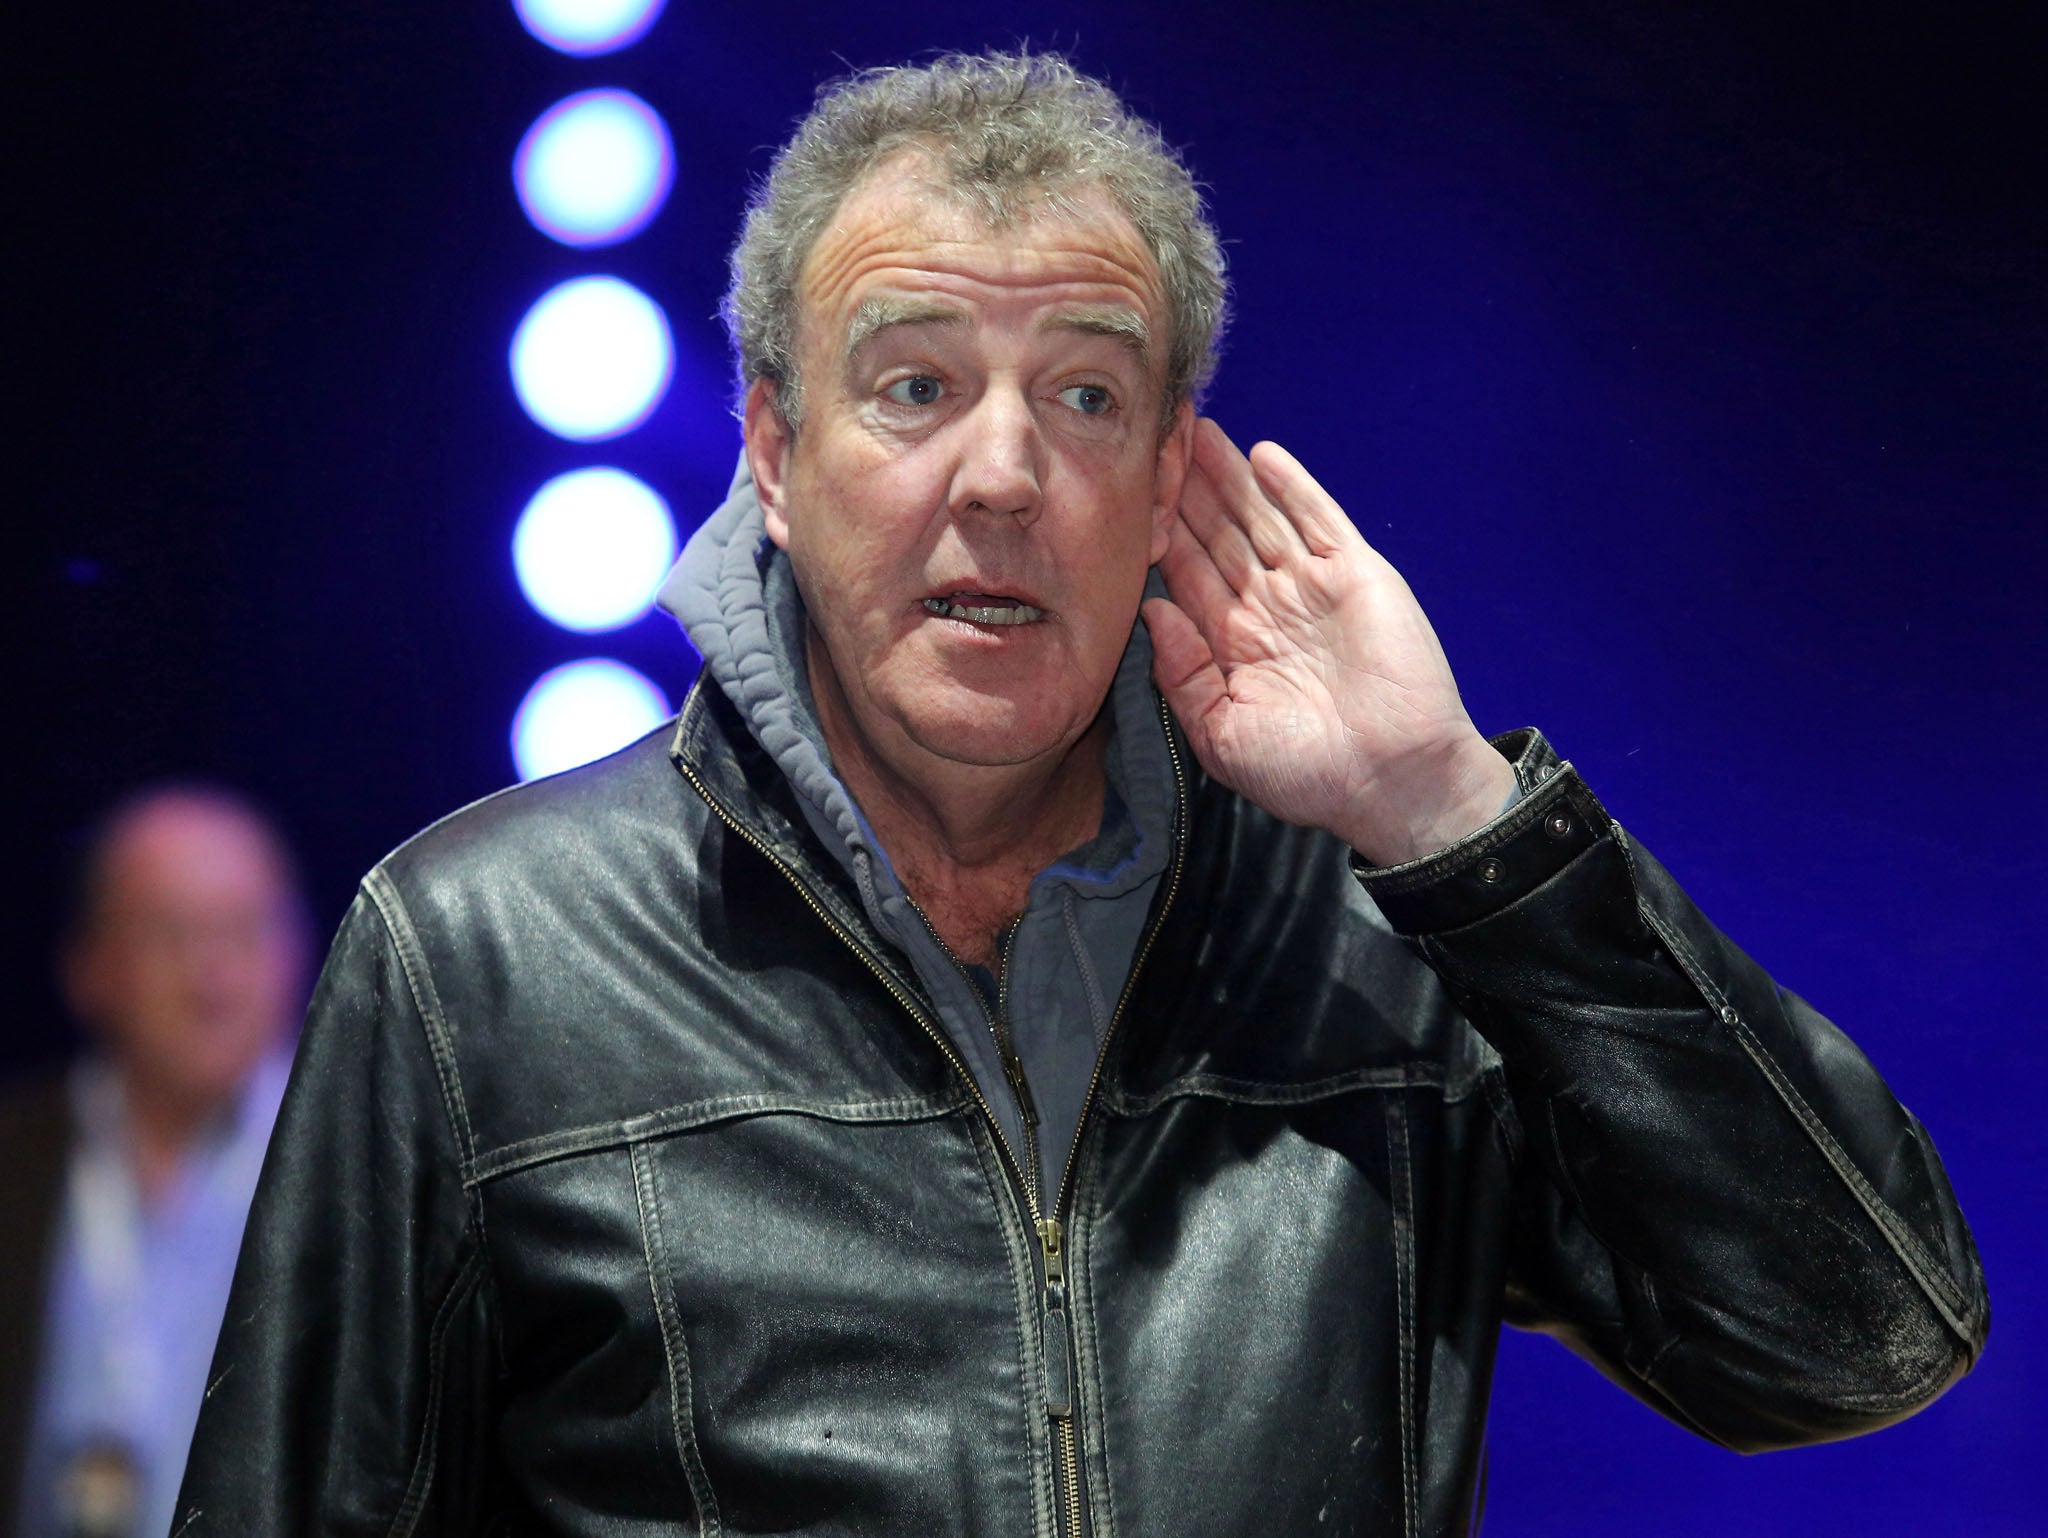 Jeremy Clarkson is involved in further controversy over a second set of number plates found in the vehicle he was driving in Argentina